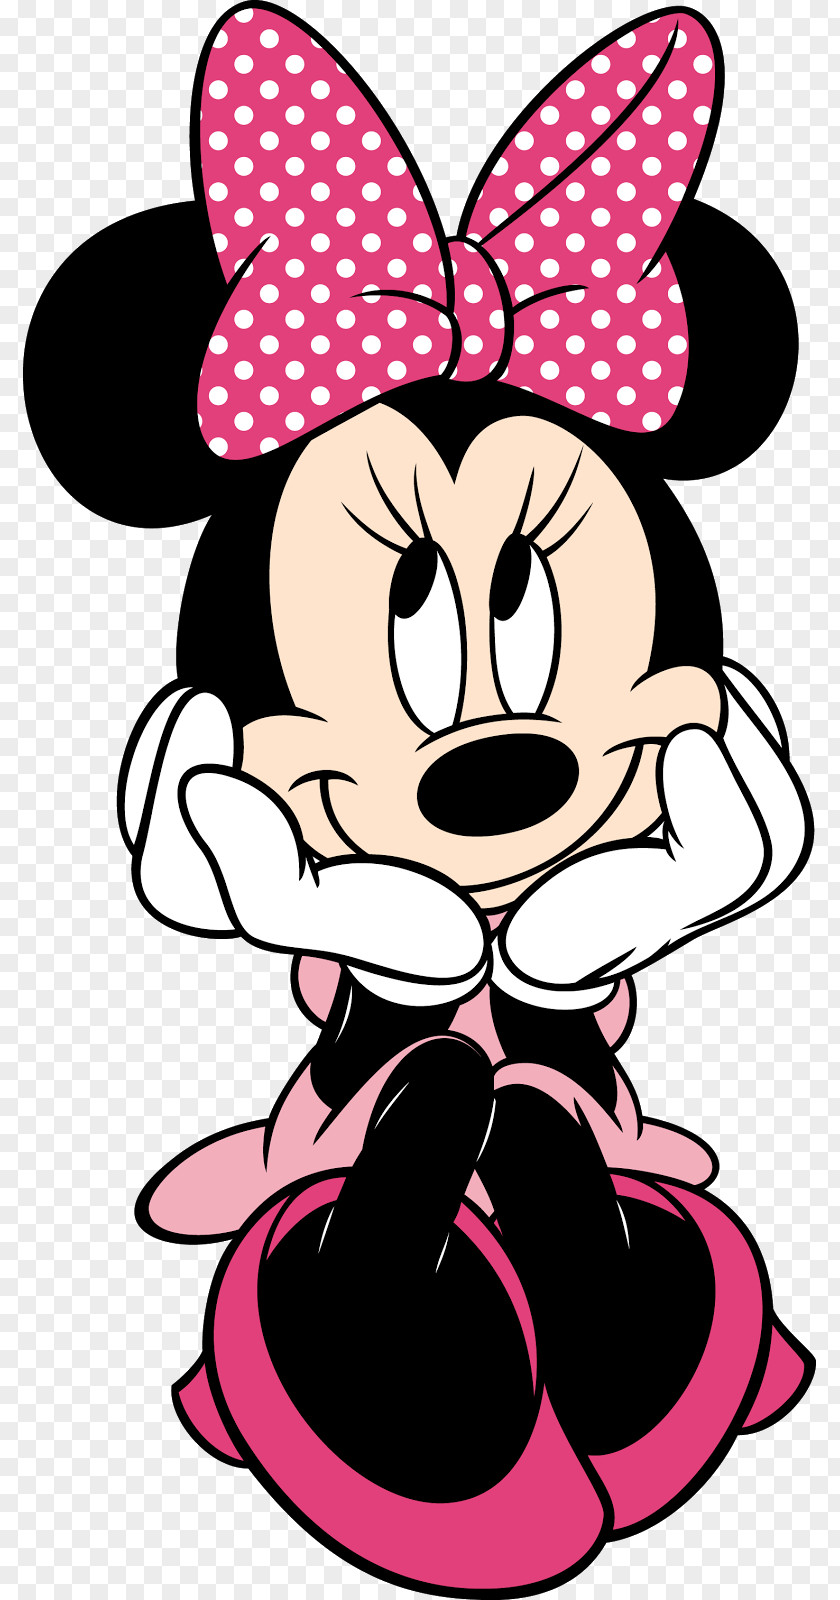 Baby Minnie Cliparts Mouse Mickey Daisy Duck Clip Art PNG